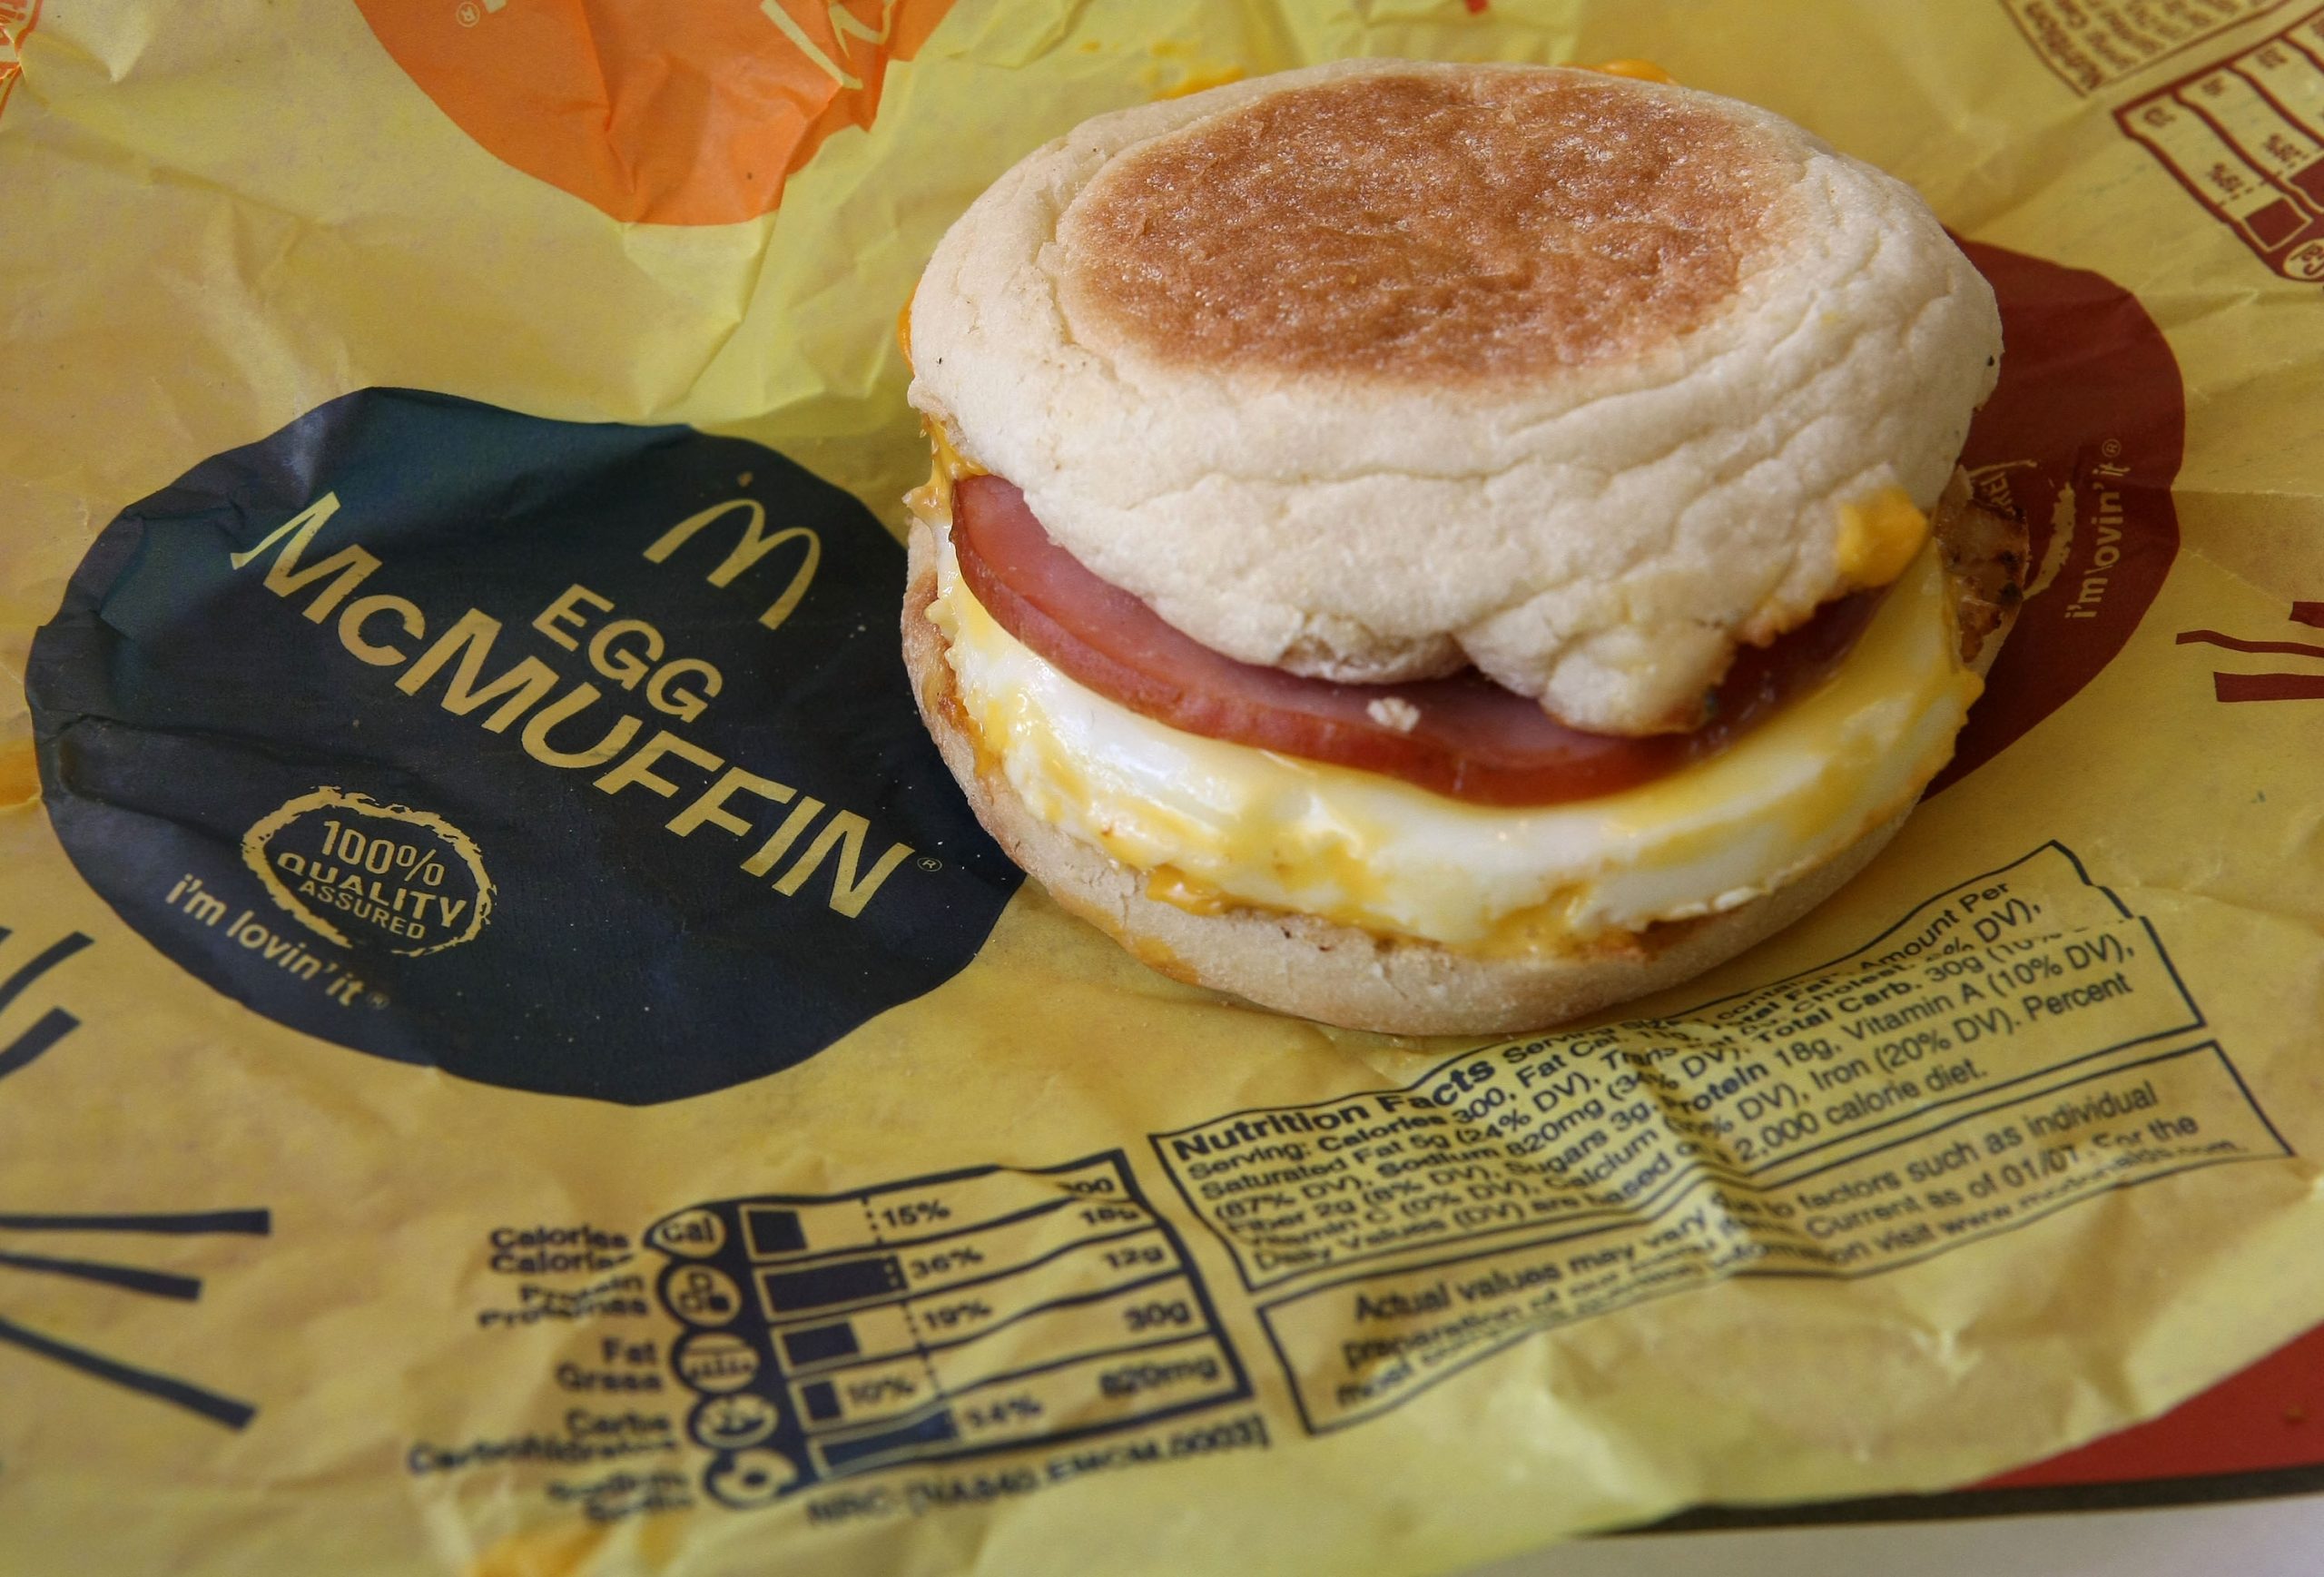 I made my own McDonald’s McMuffin using a common household item for half the price – it will save me a fortune